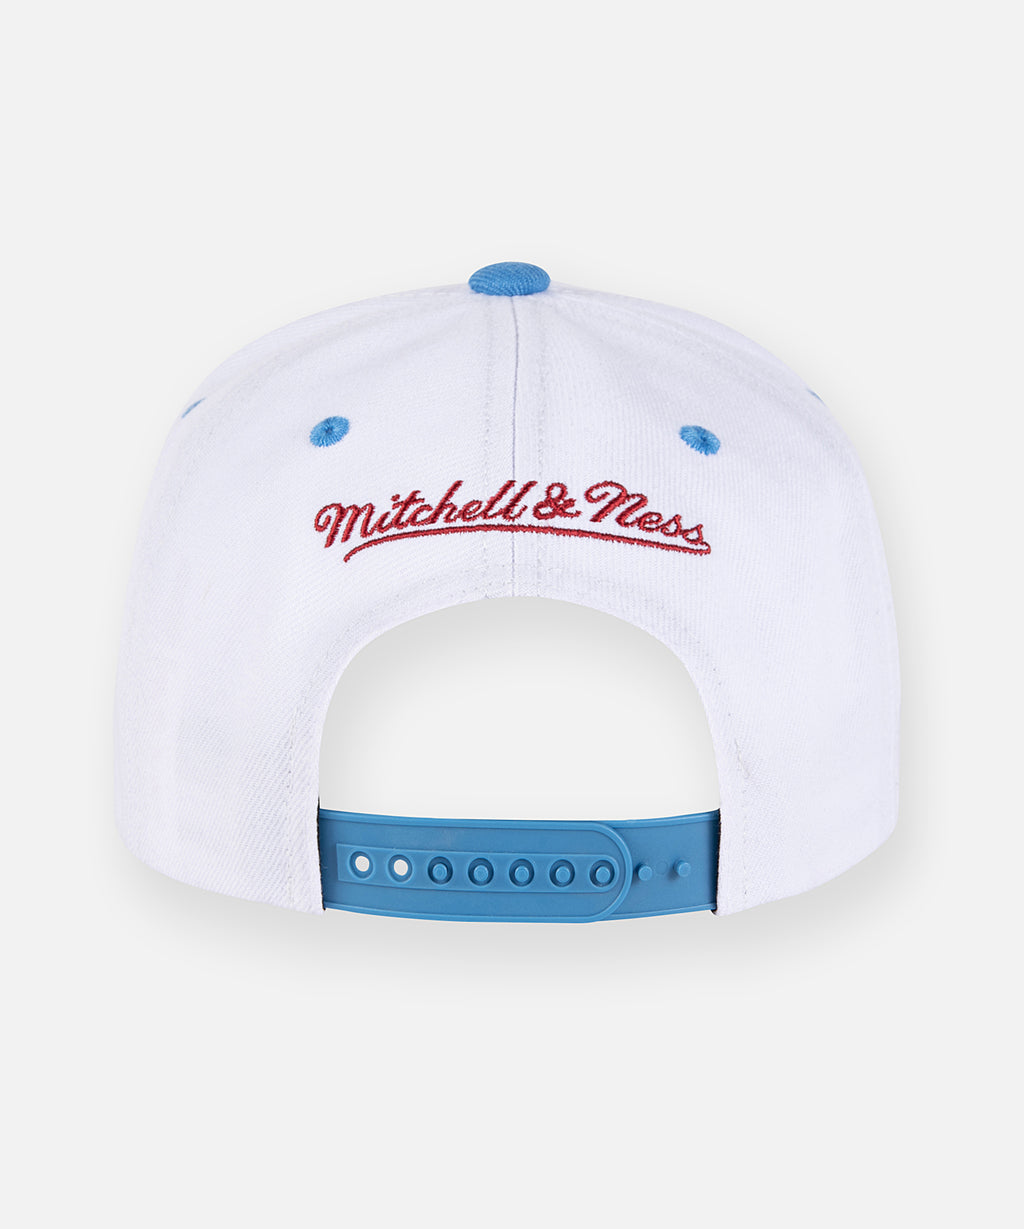  Mitchell & Ness embroidery on back of Paper Planes University of Greatness A-Frame Curved Visor.